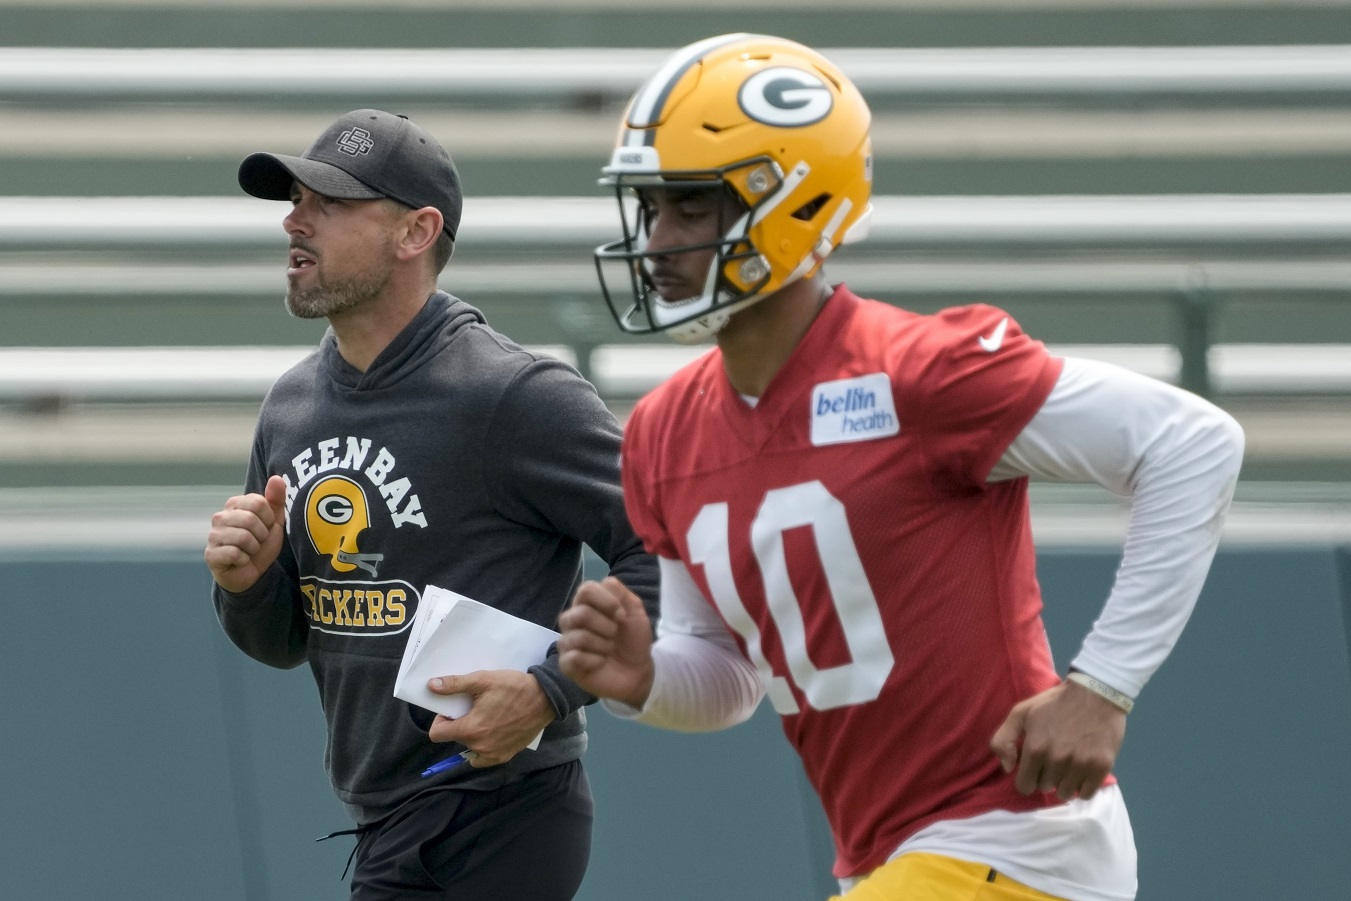 Packers’ youth has LaFleur feeling as if he’s a first-year coach again heading into training camp